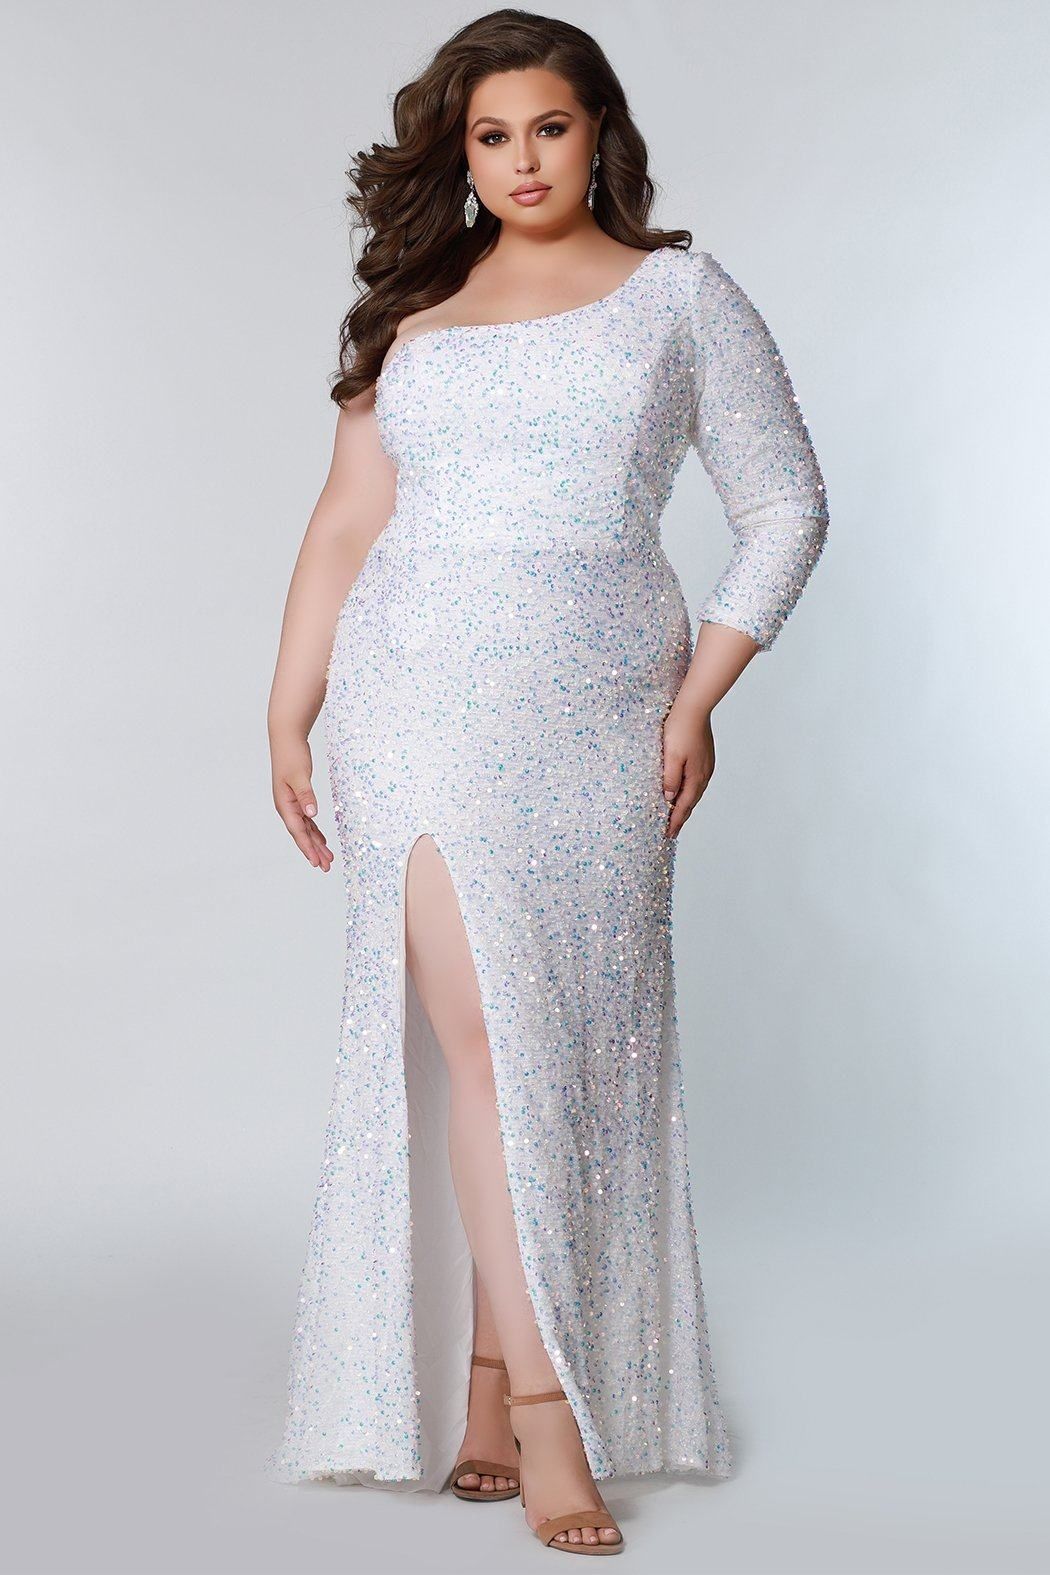 Style SC7319 Sydney's Closet Plus Size 20 Prom White Side Slit Dress on Queenly